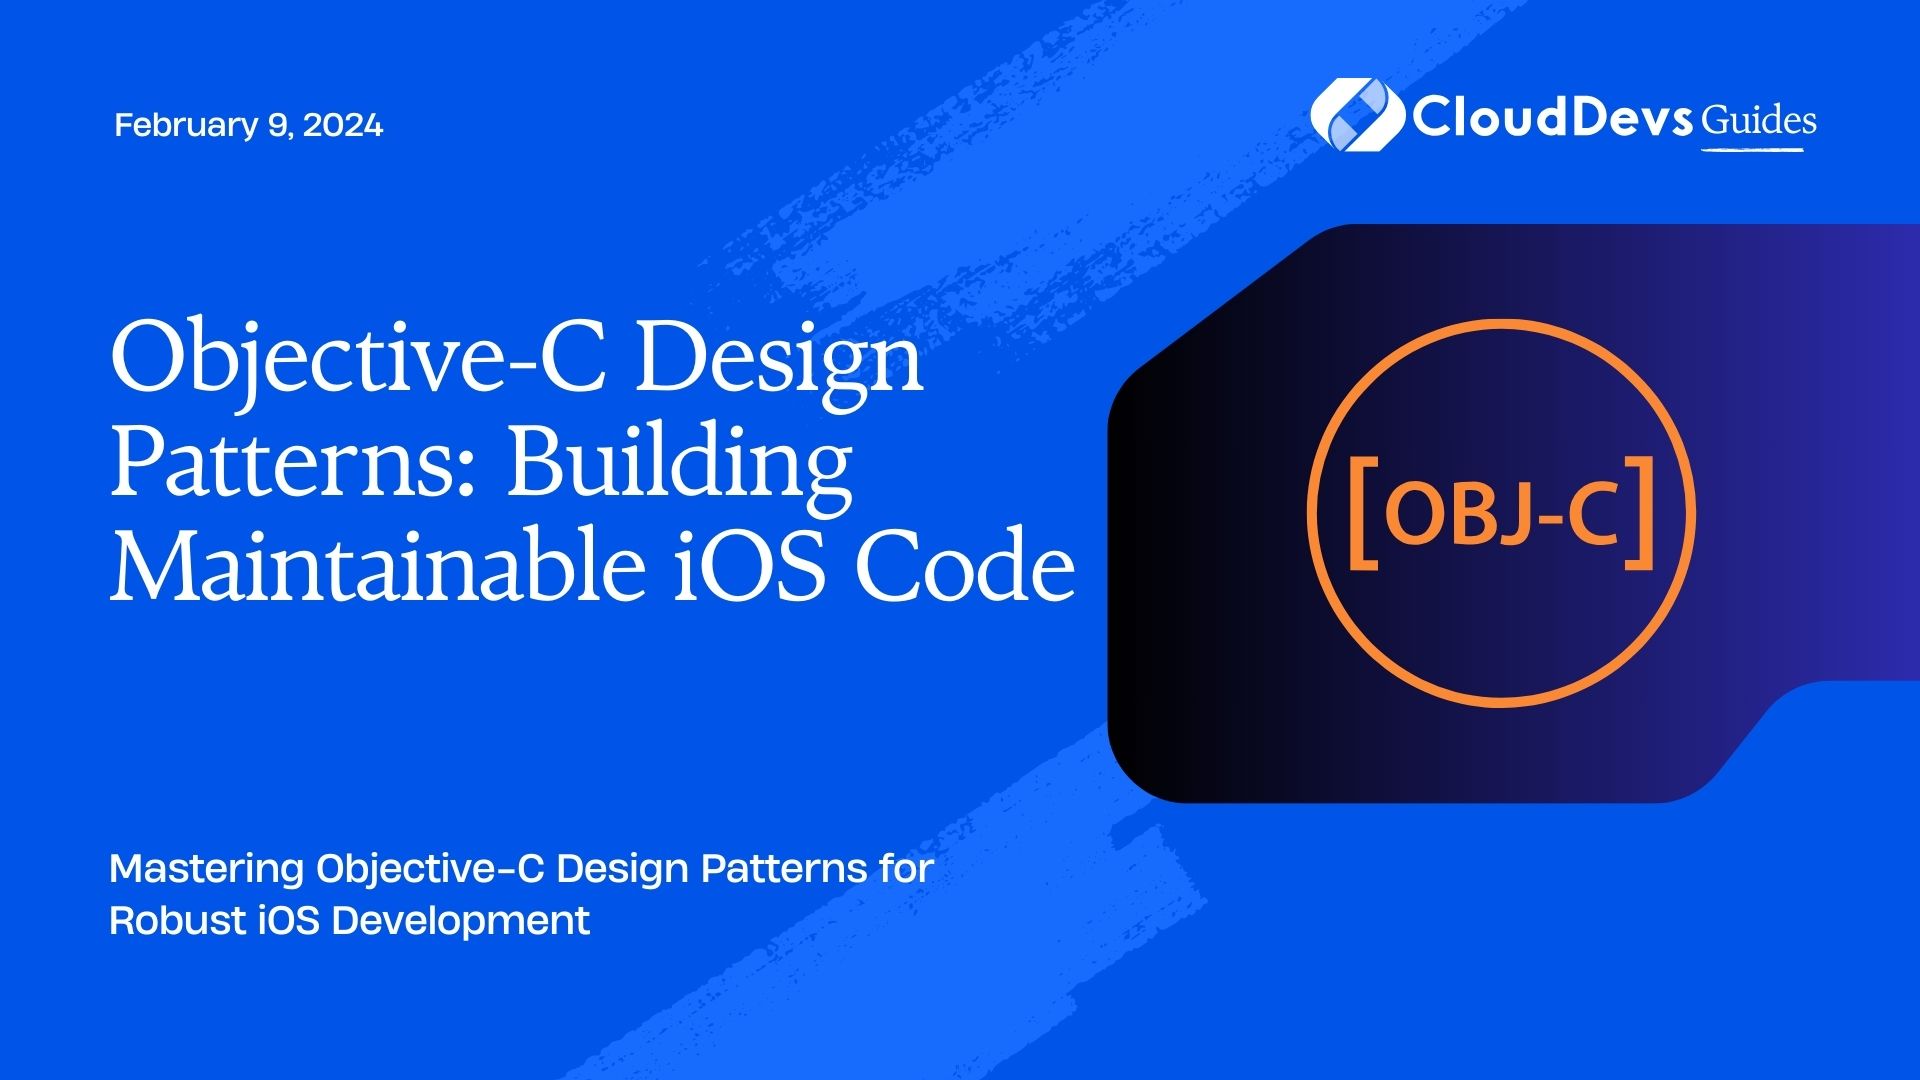 Objective-C Design Patterns: Building Maintainable iOS Code